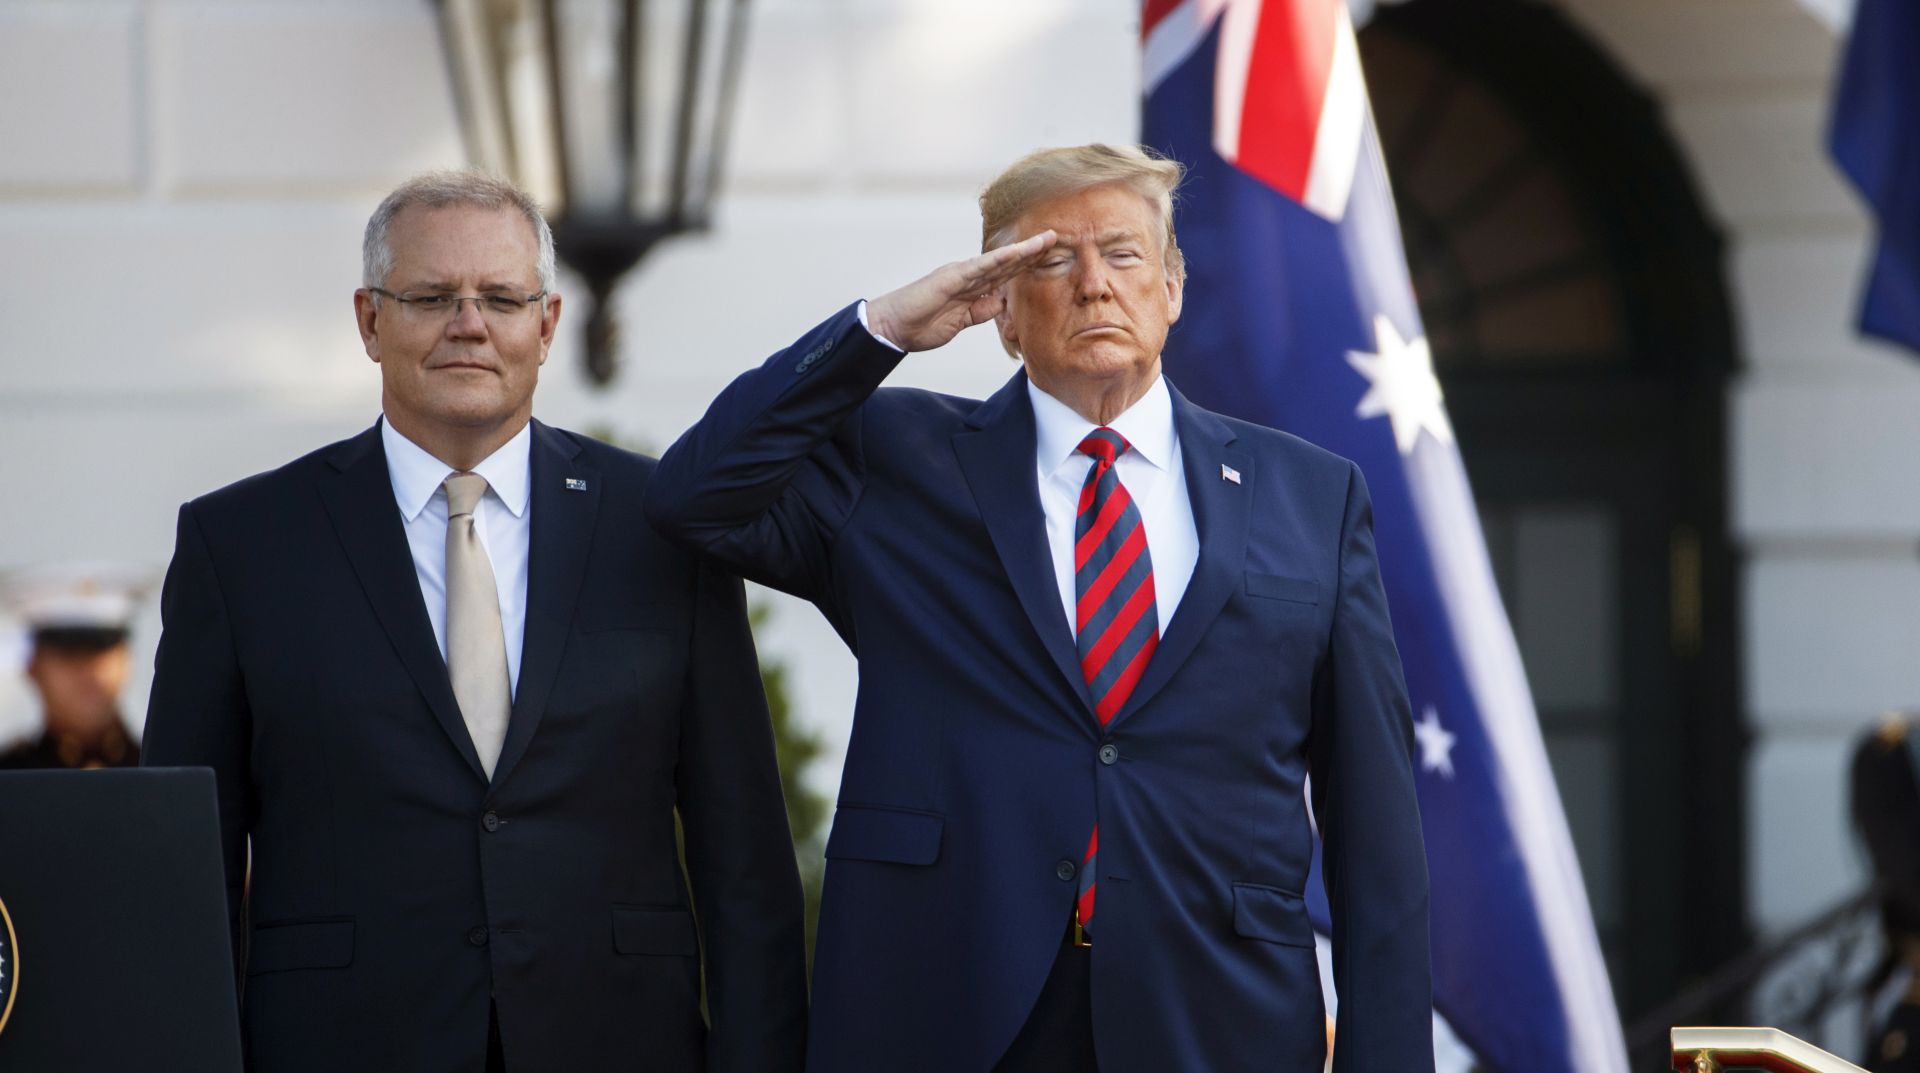 epa07856216 US President Donald J. Trump (R) welcomes Prime Minister of Australia Scott Morrison (L) to the South Lawn of the White House for a state arrival ceremony in Washington, DC, USA, 20 September 2019. The occasion marks the second state visit of Donald Trump's presidency.  EPA/SHAWN THEW